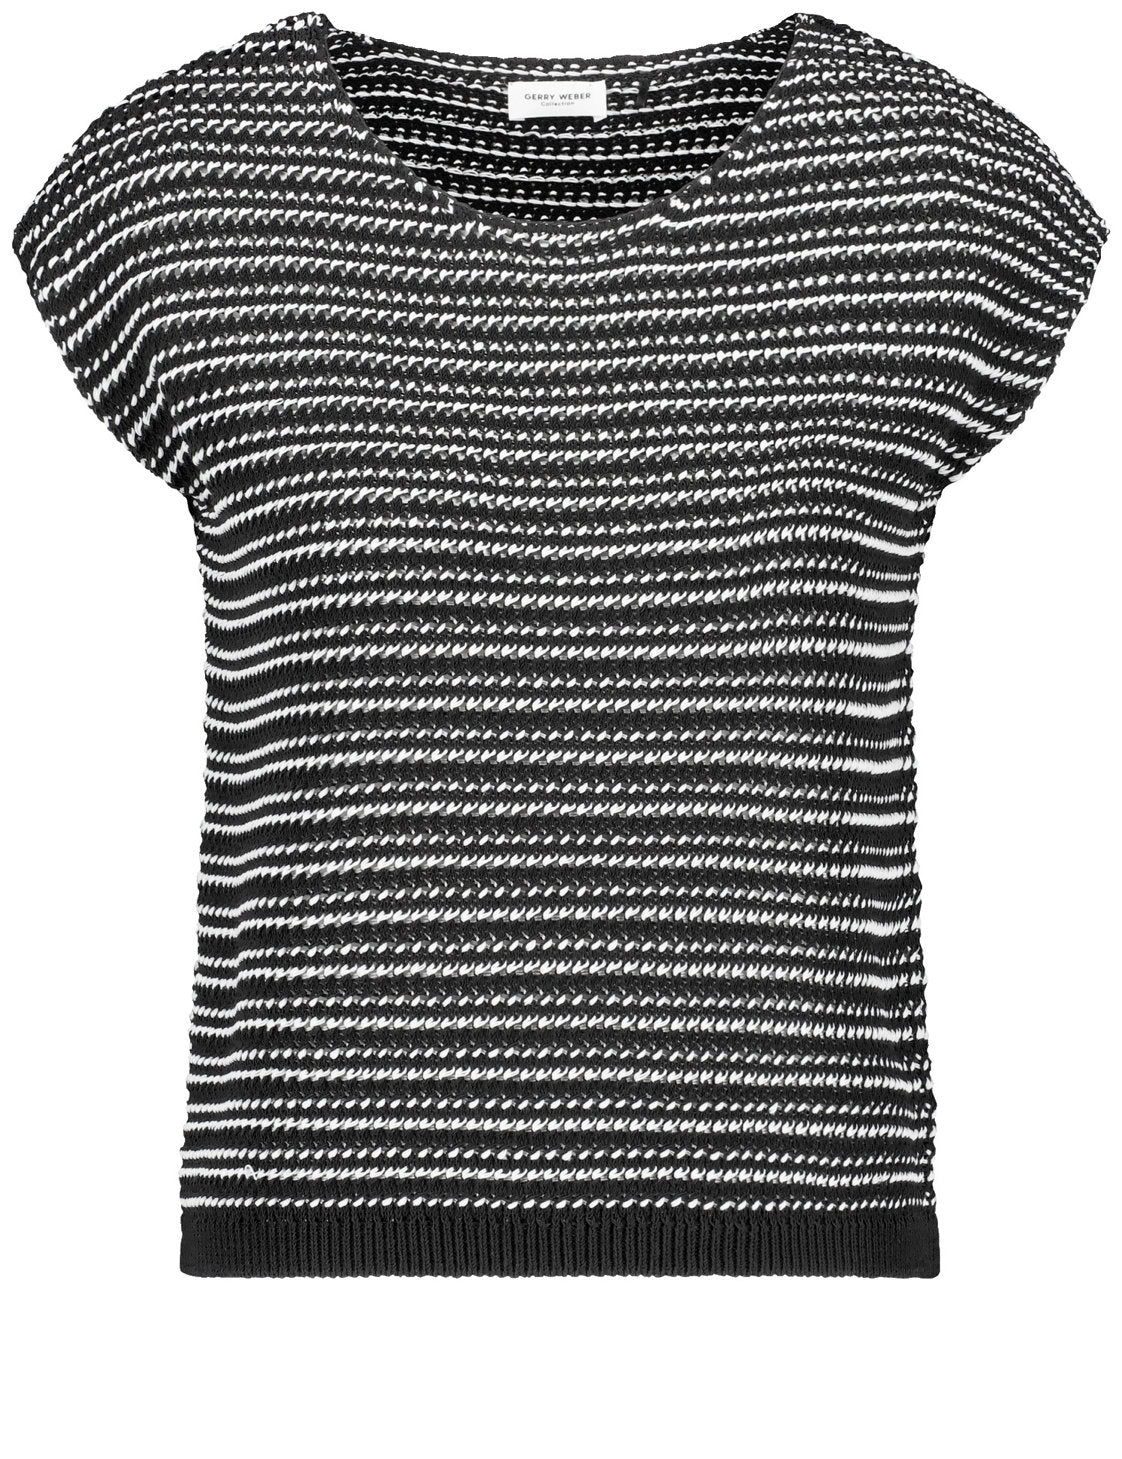 Striped Sleeveless Jumper In A Textured Knit_371021-35737_1090_07